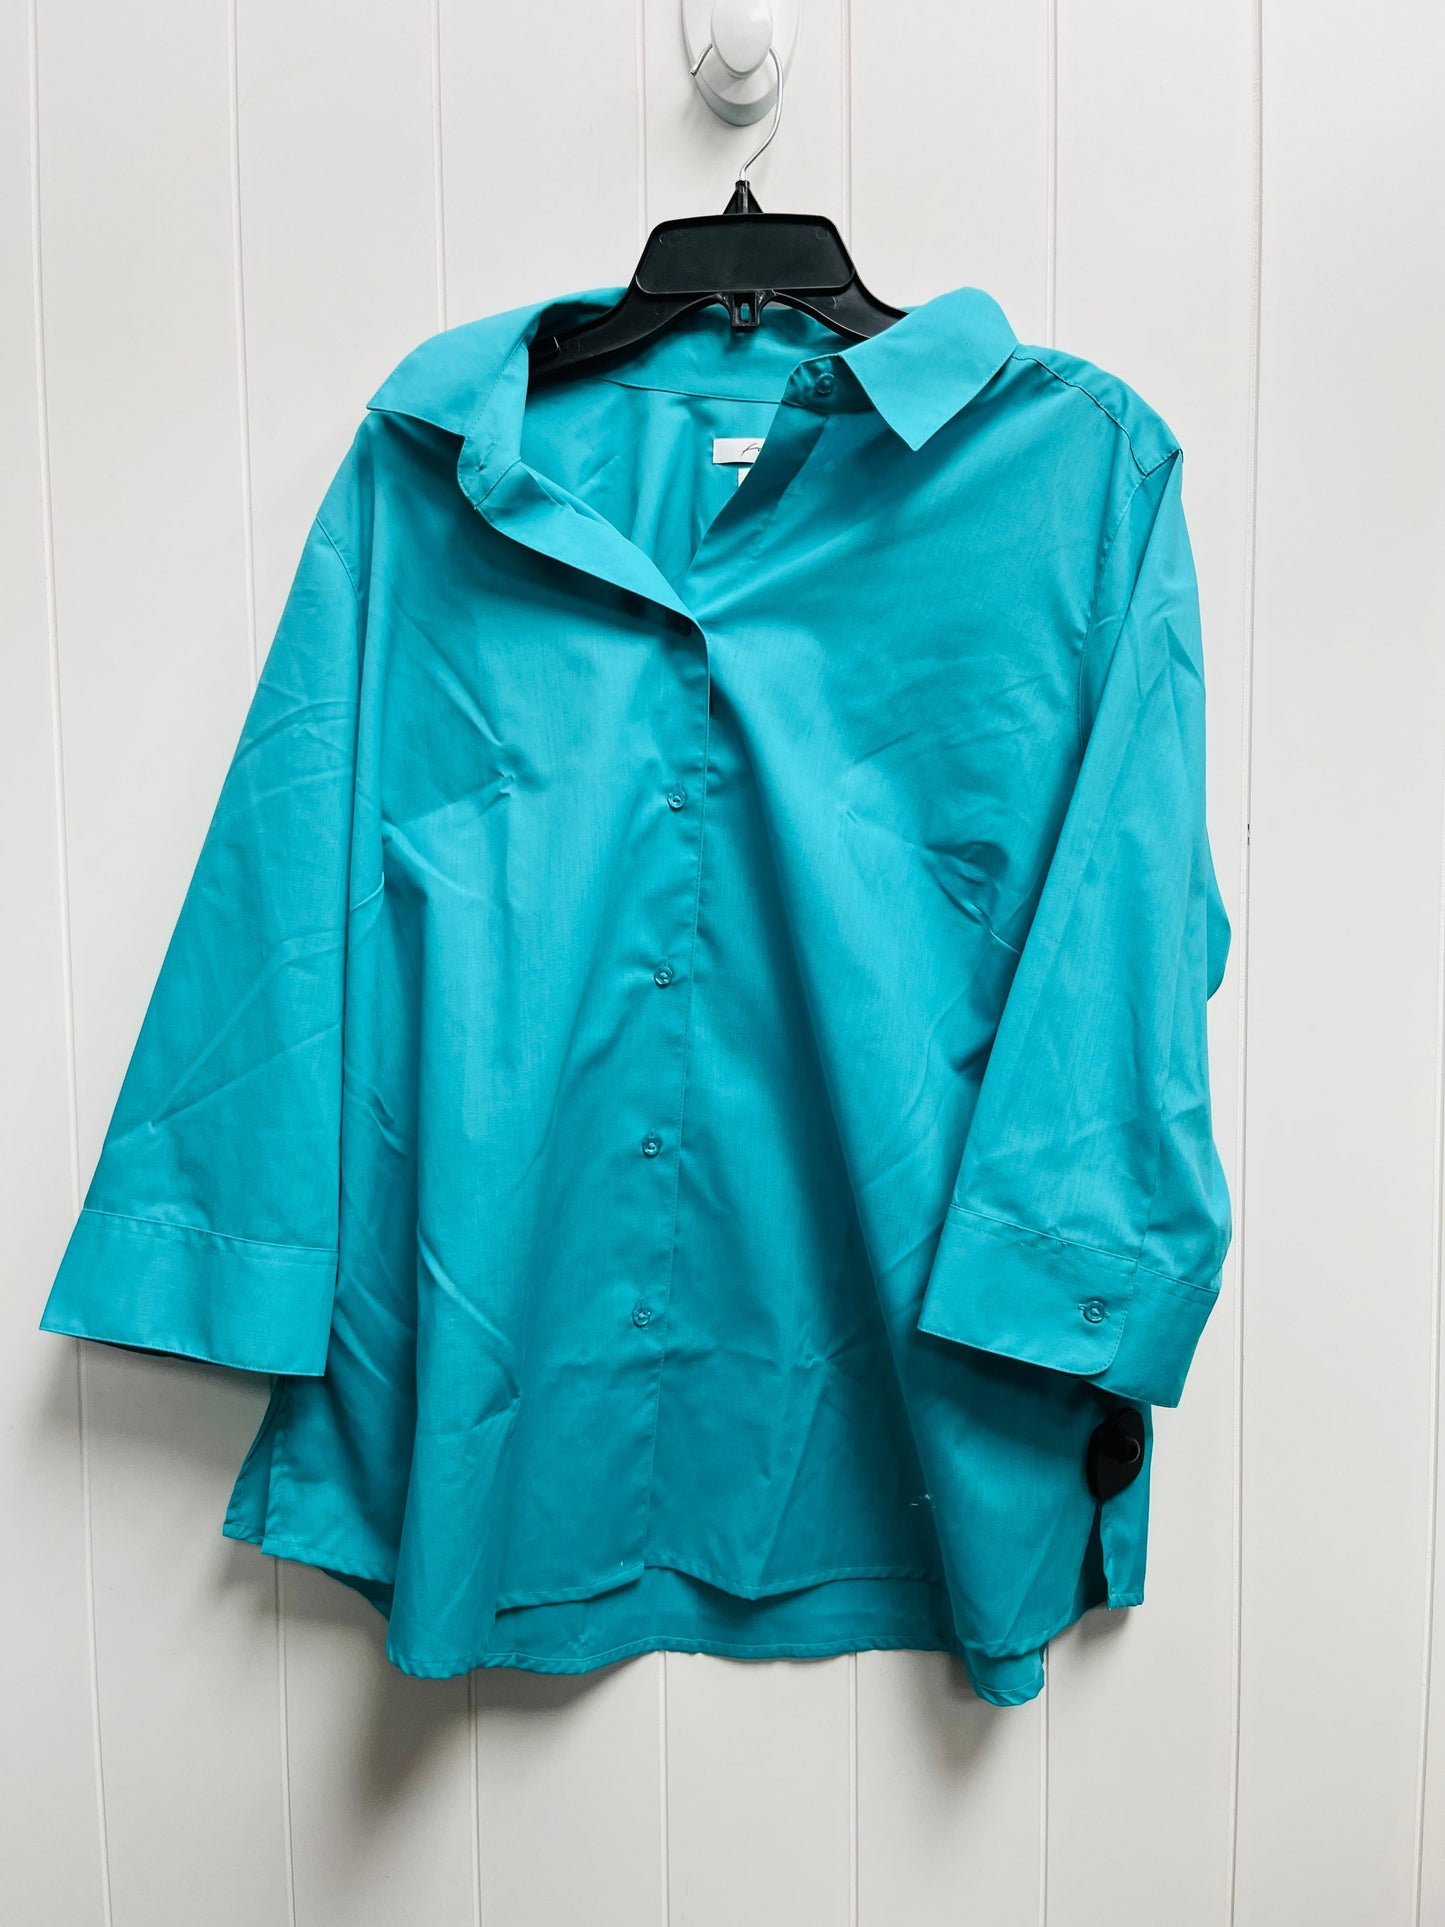 Teal Top Long Sleeve Foxcroft, Size 16